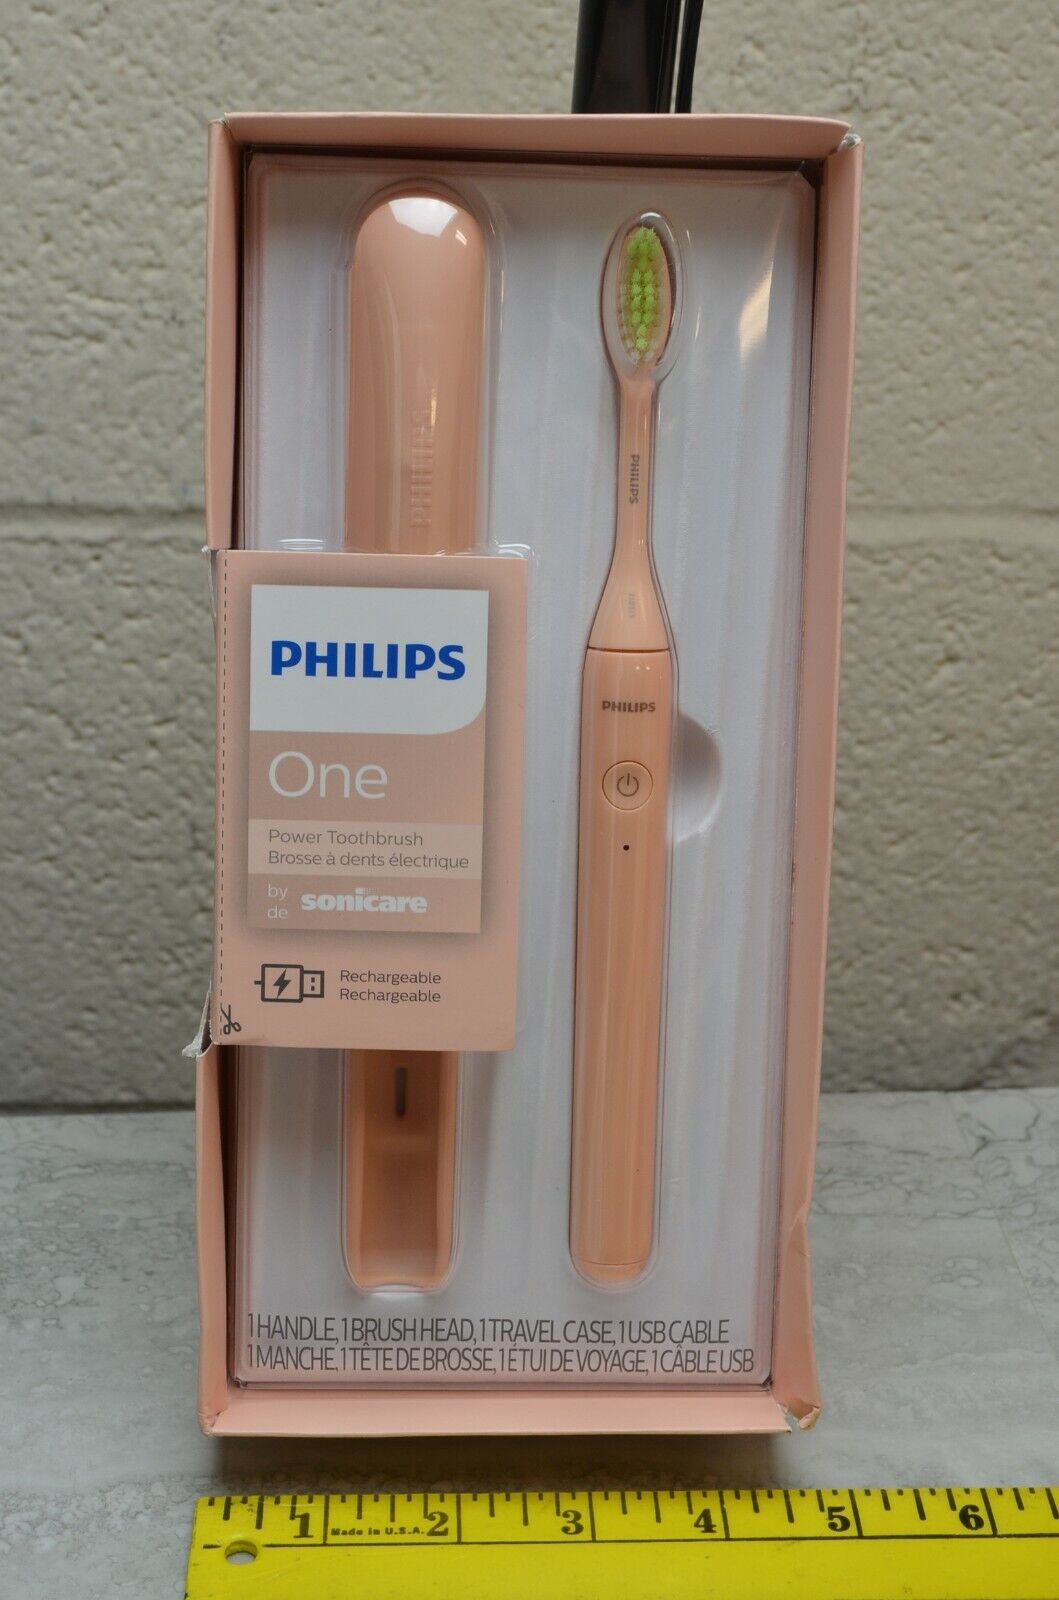 Popular shop is the lowest price challenge Philips One By Sonicare Max 47% OFF Power Toothbrush HY1200 05 Rechargeable